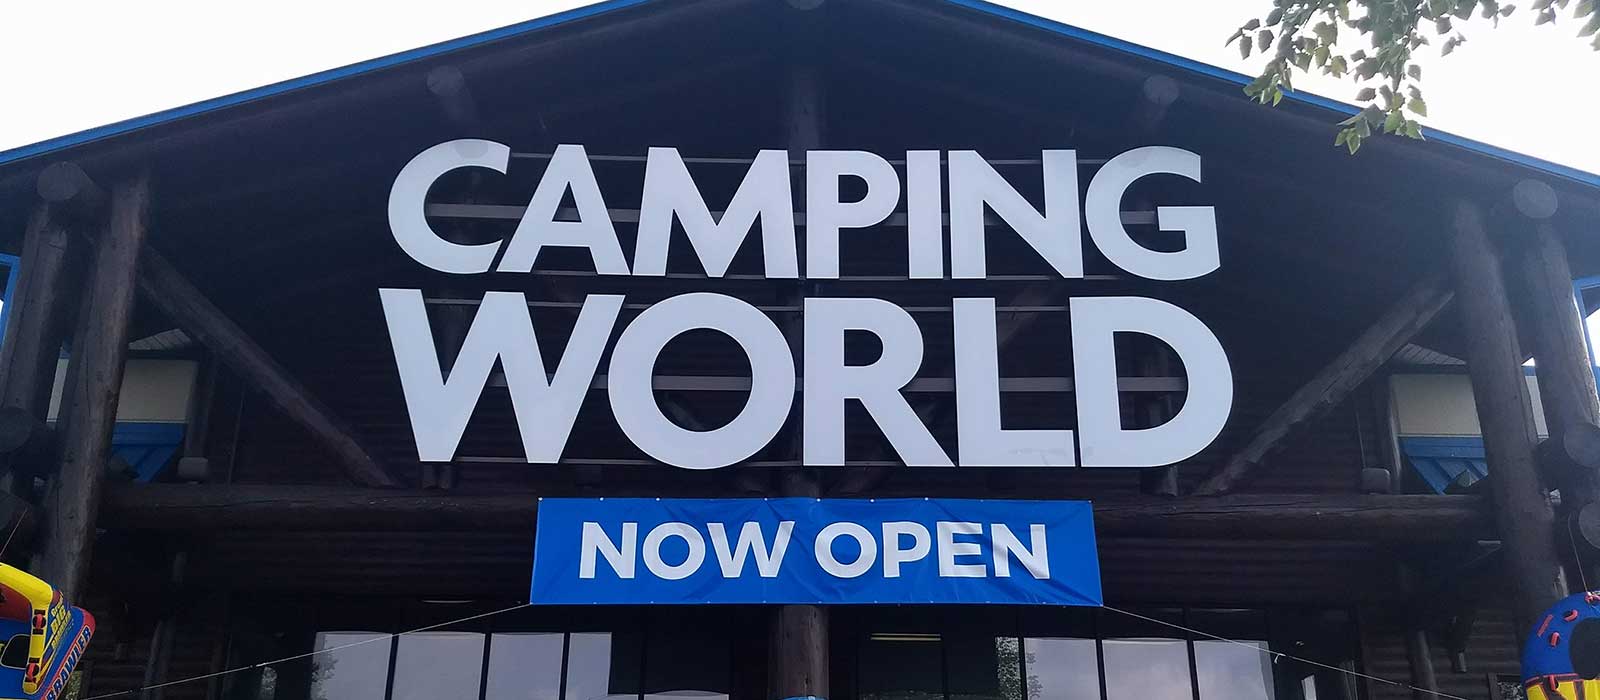 Camping World National Signage Channel Letters